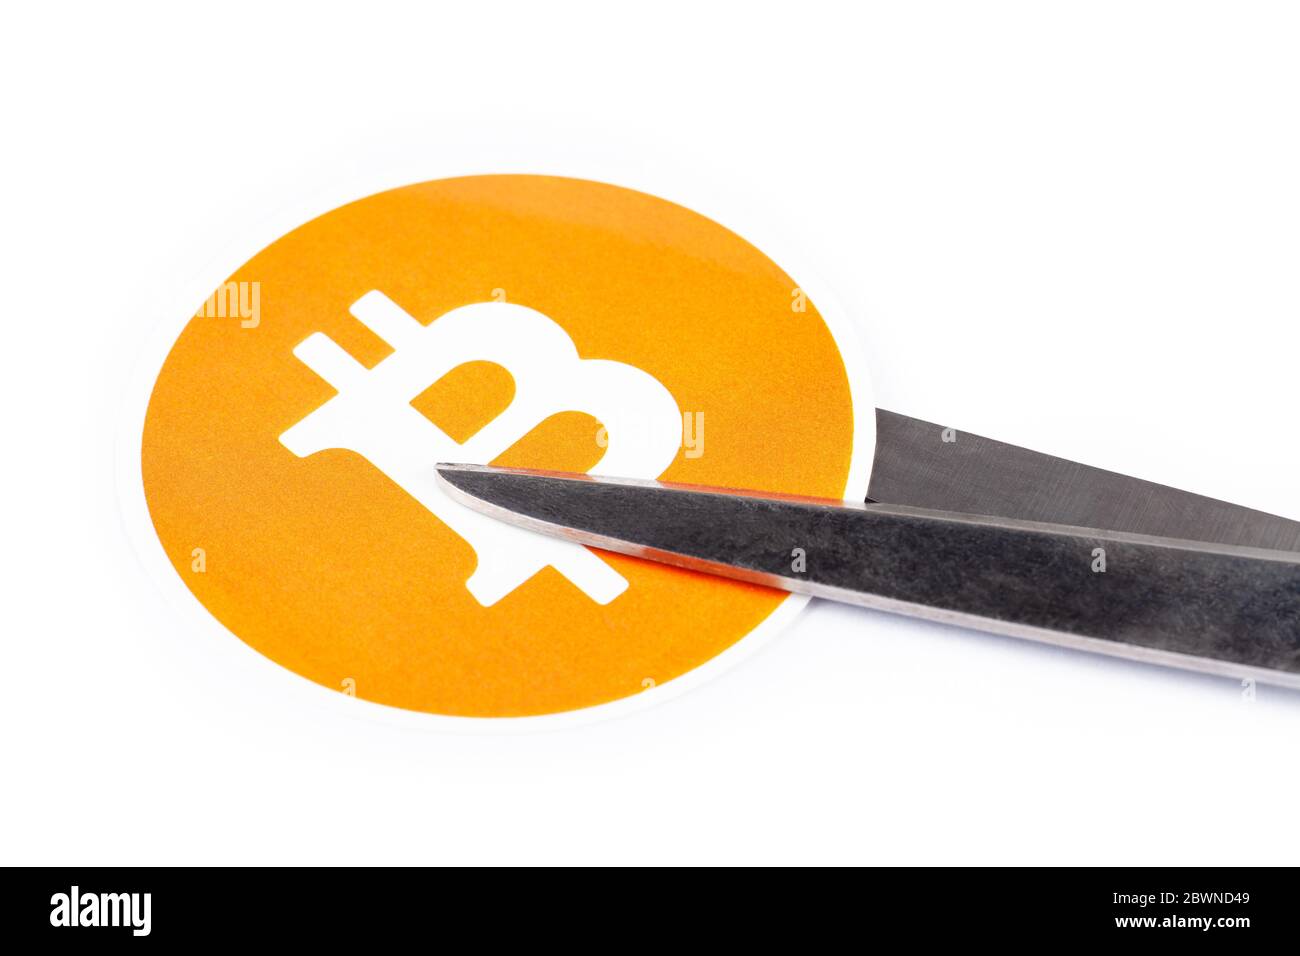 Bitcoin symbol, logo being cut in two with scissors, white background Halving, cutting price, going downwards, bearish crypto currency trend, BTC Stock Photo